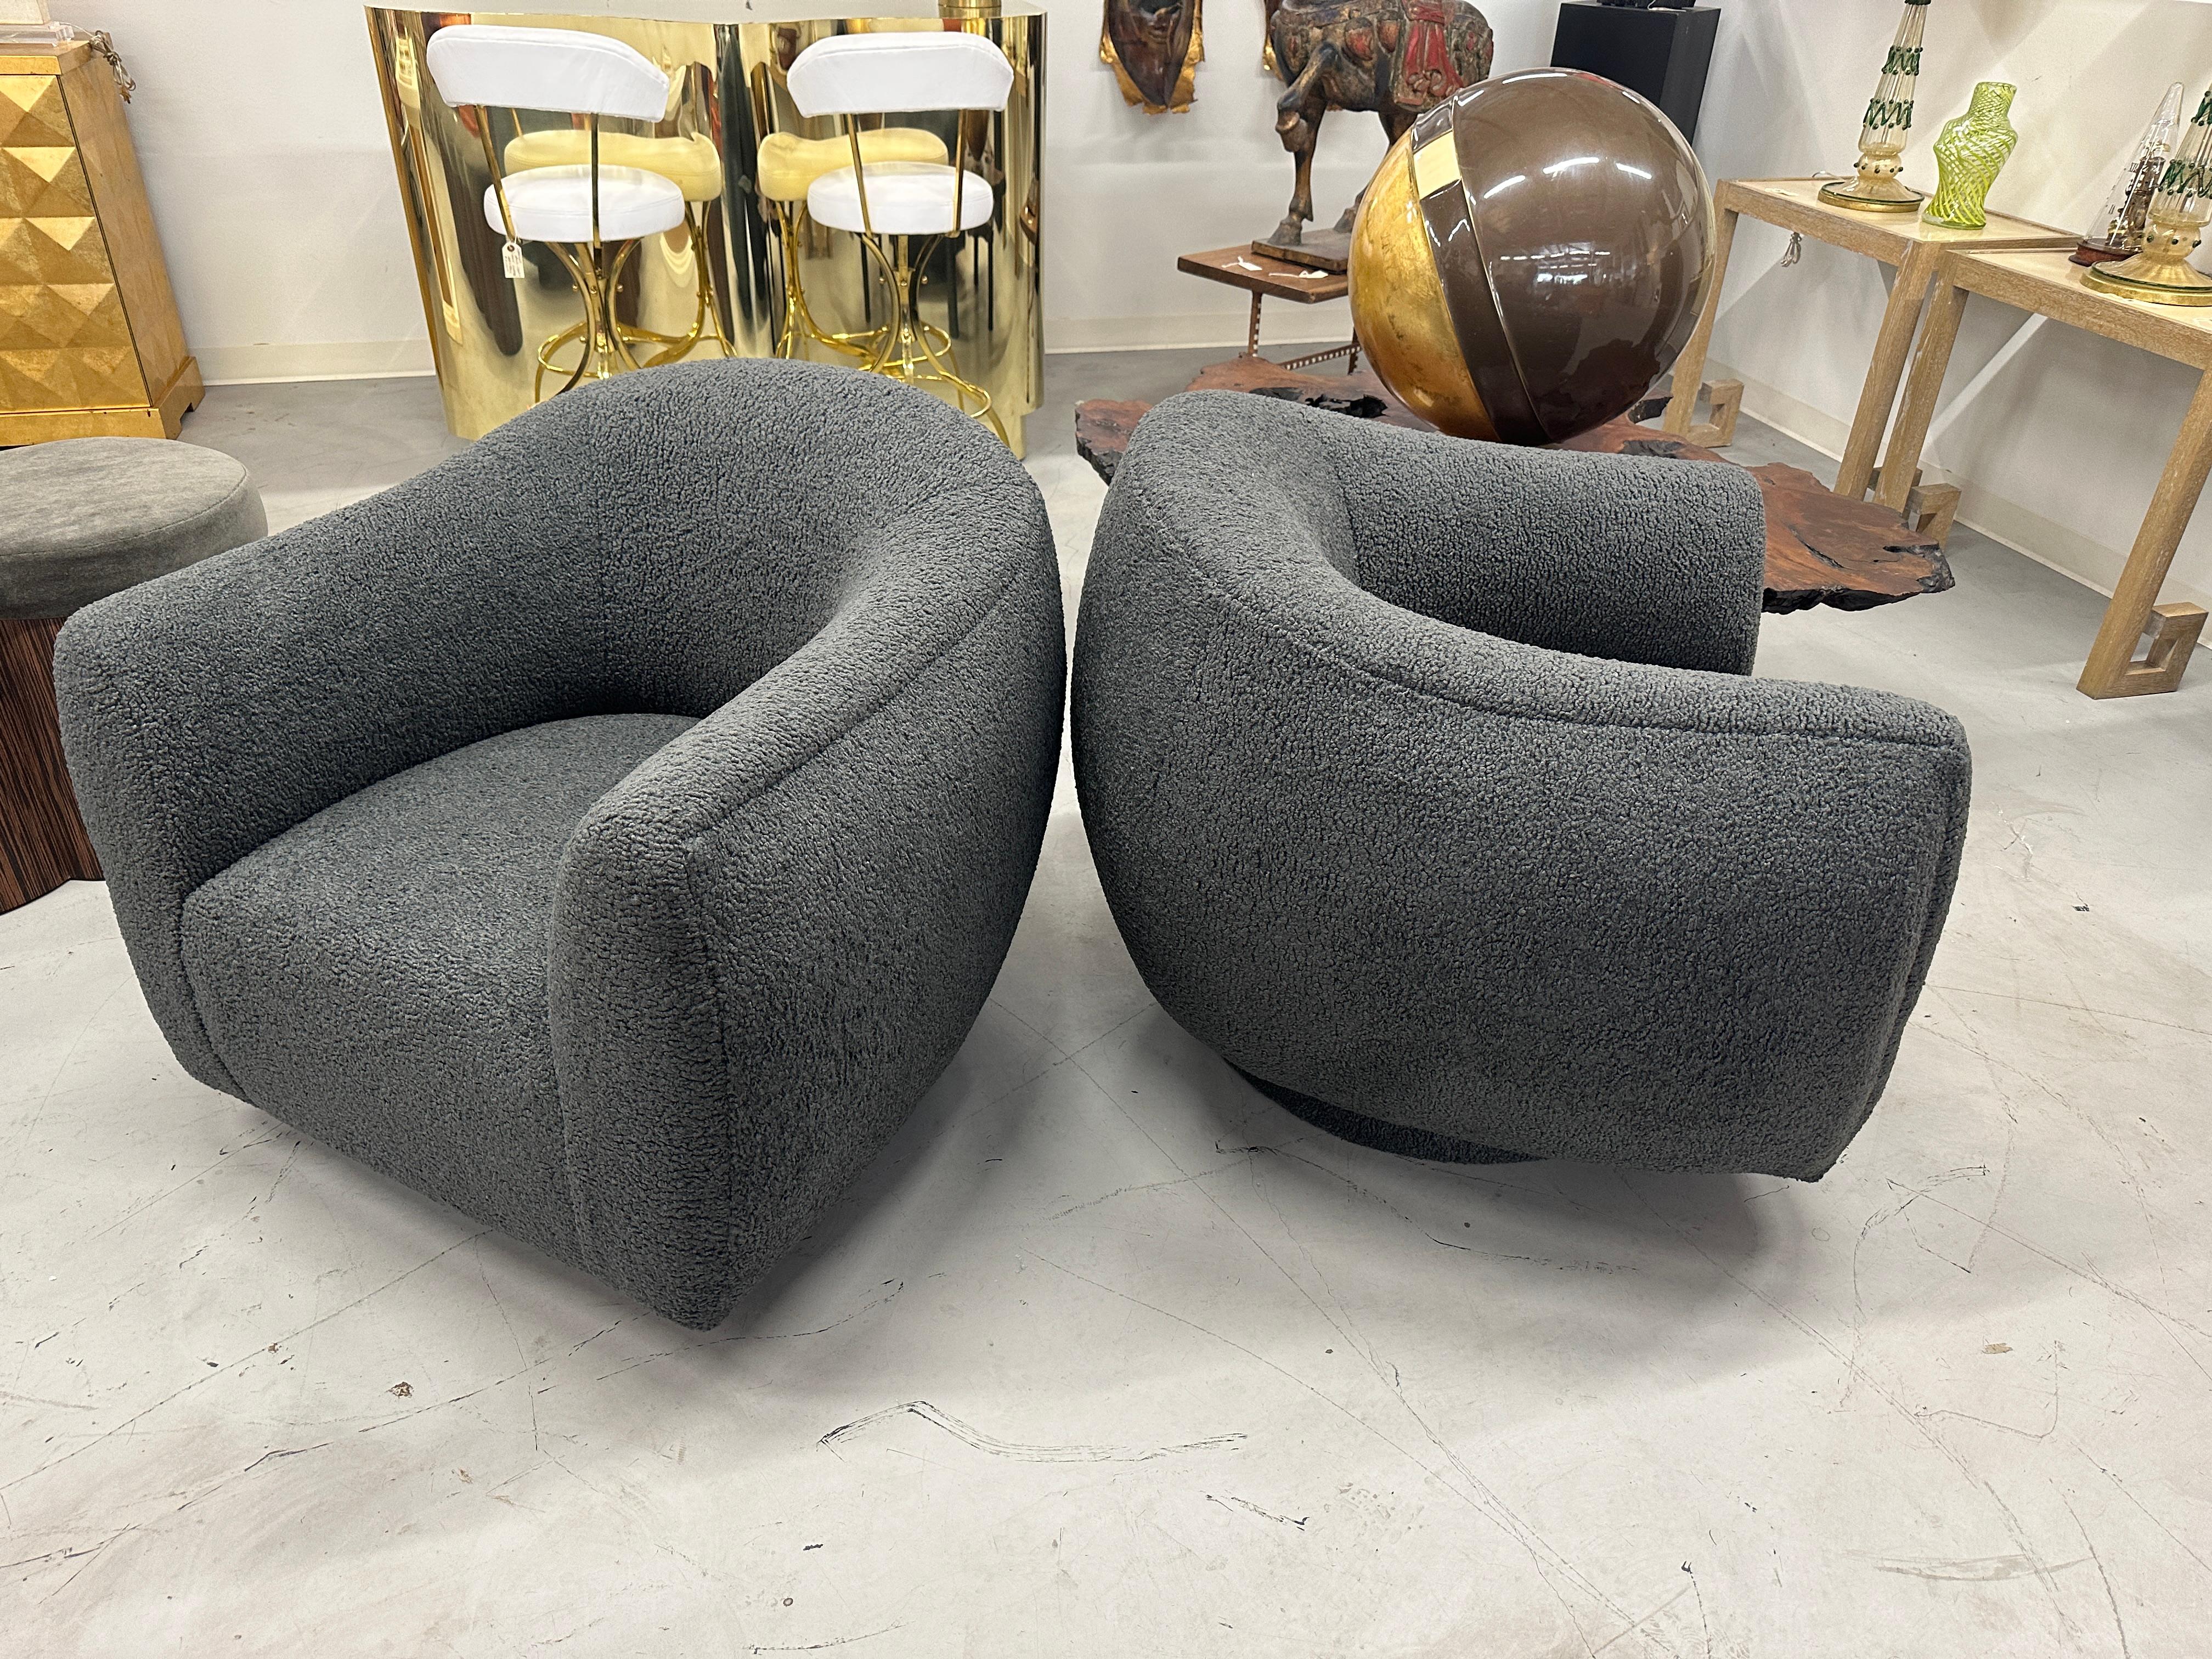 Wonderful pair of oversized A. Rudin swivel chairs we bought out of a lovely Palm Springs Estate a while back and had reupholstered and had made more generous. We had them redone in a lovely Italian grey boucle. The round bases are upholstered.